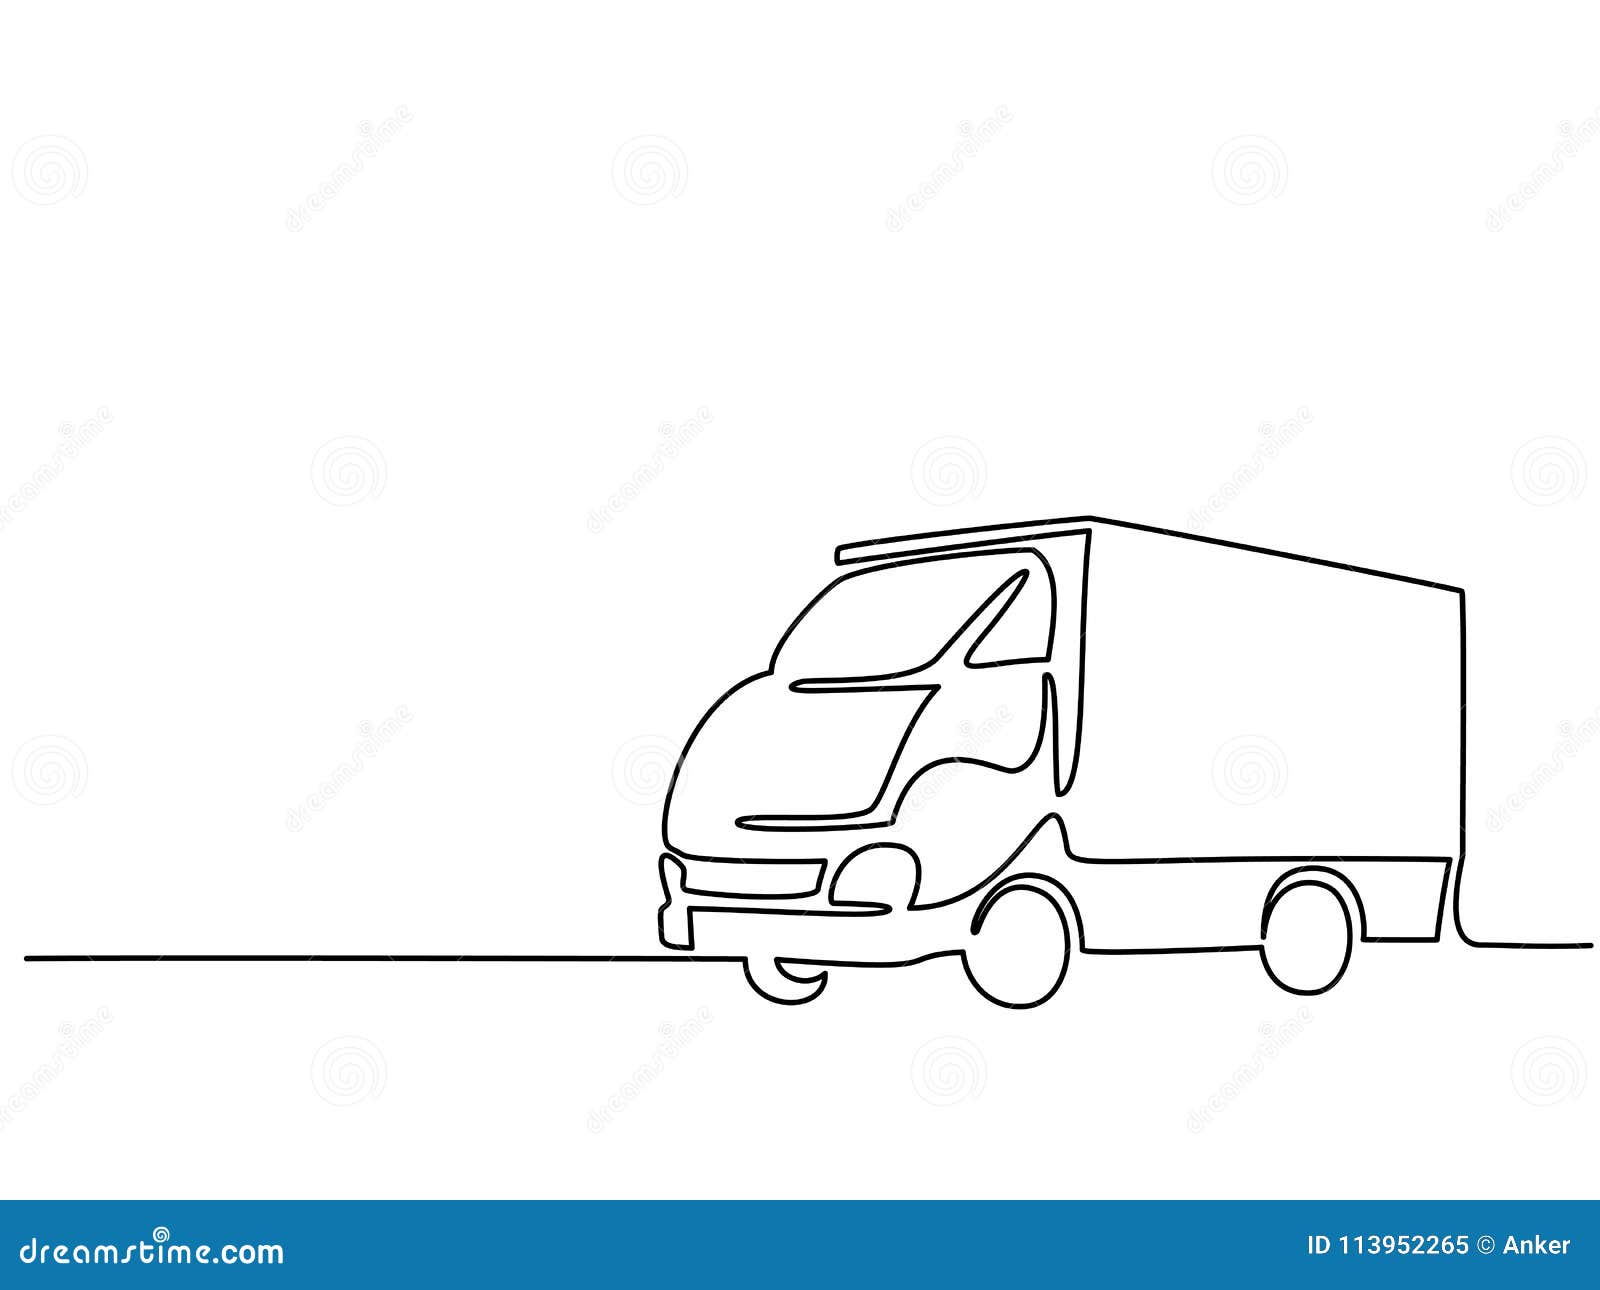 How To Draw Lorry - YouTube